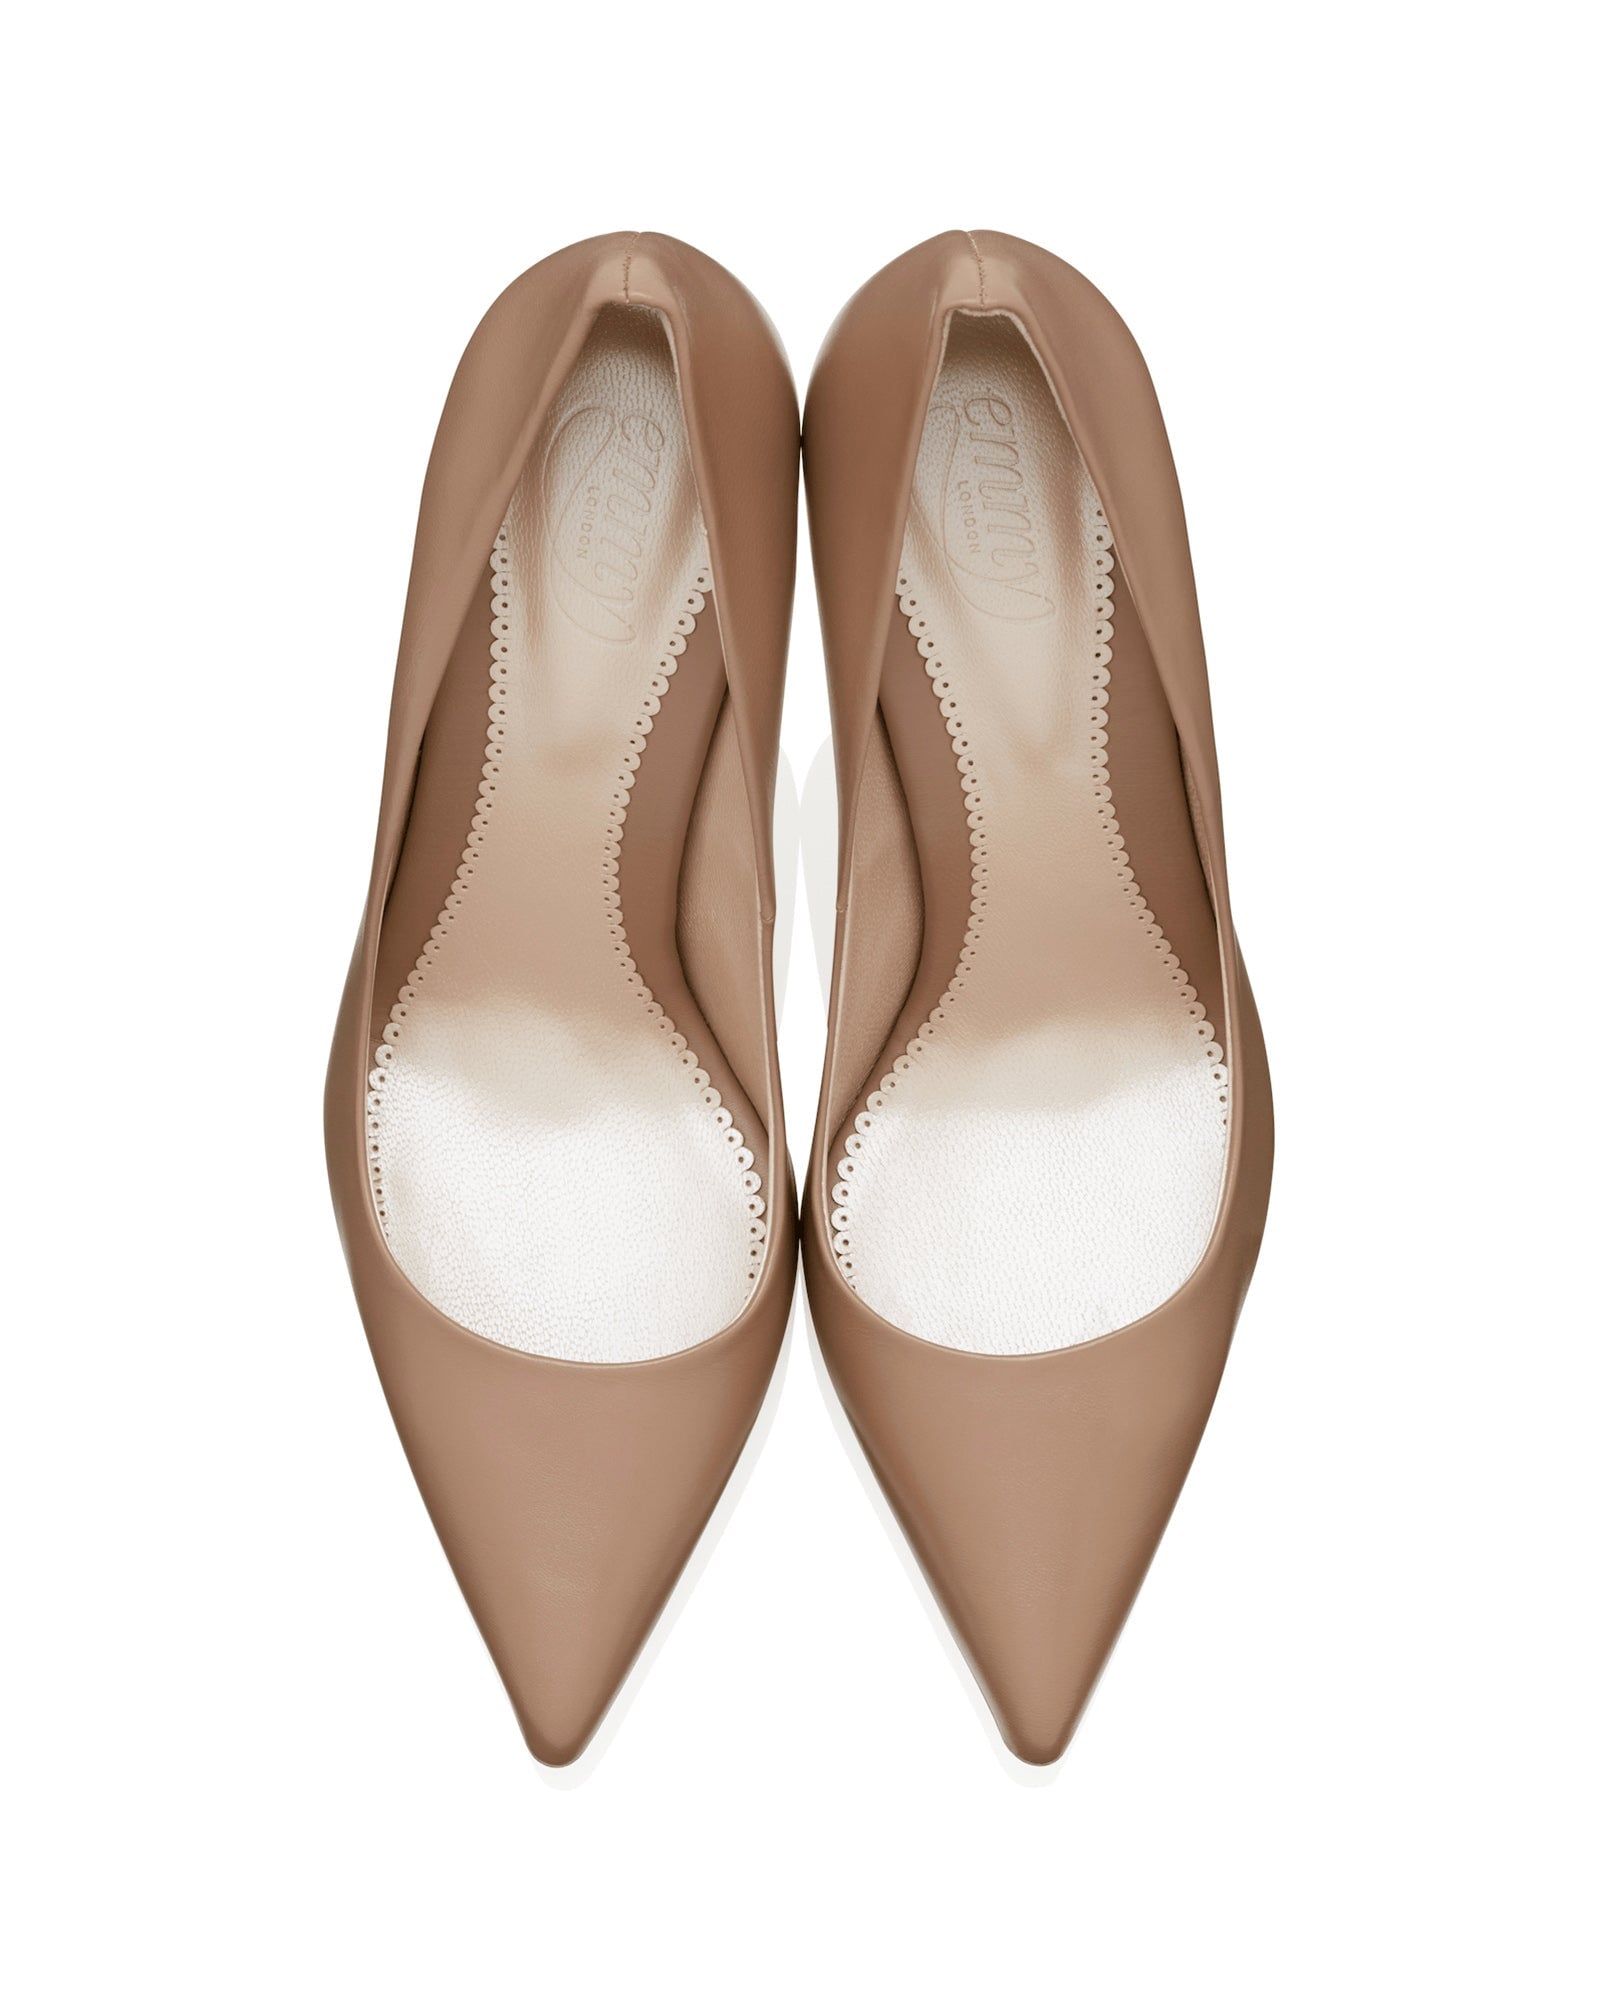 Rebecca Tan Leather Fashion Shoe Nude Leather Pointed Court Shoe  image